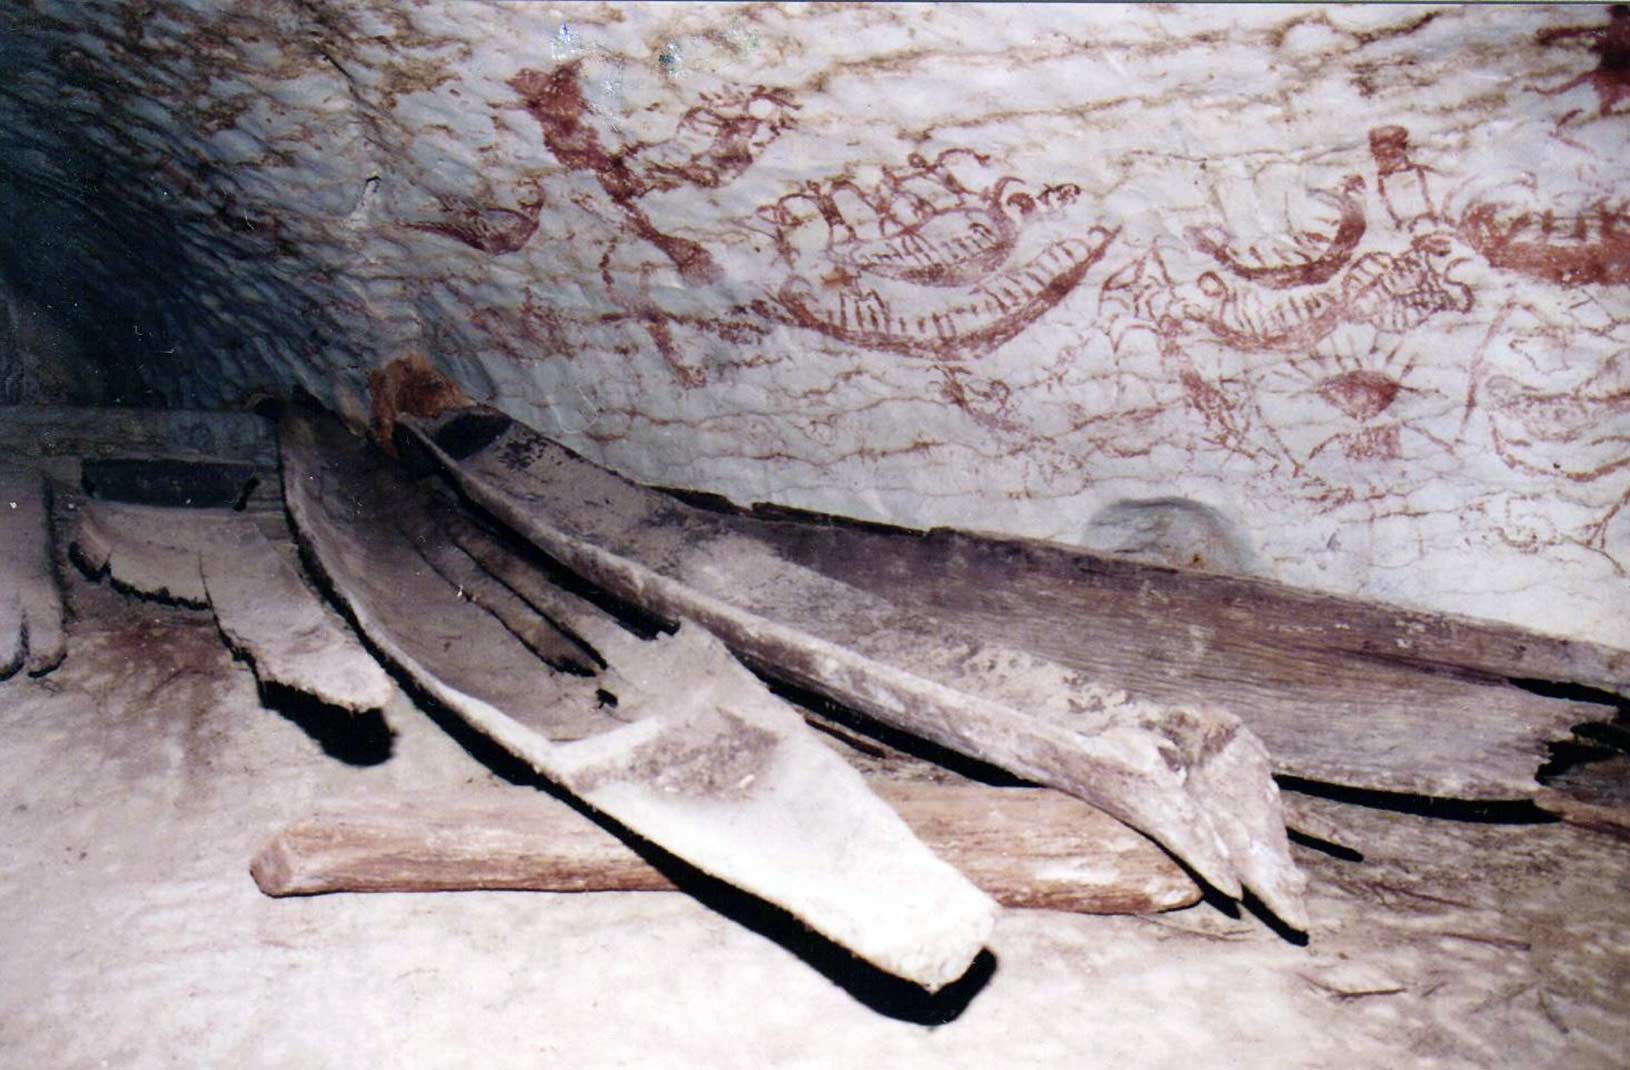 Canoes of the dead in The Painted Cave, Niah National Park, Sarawak, Malaysia.